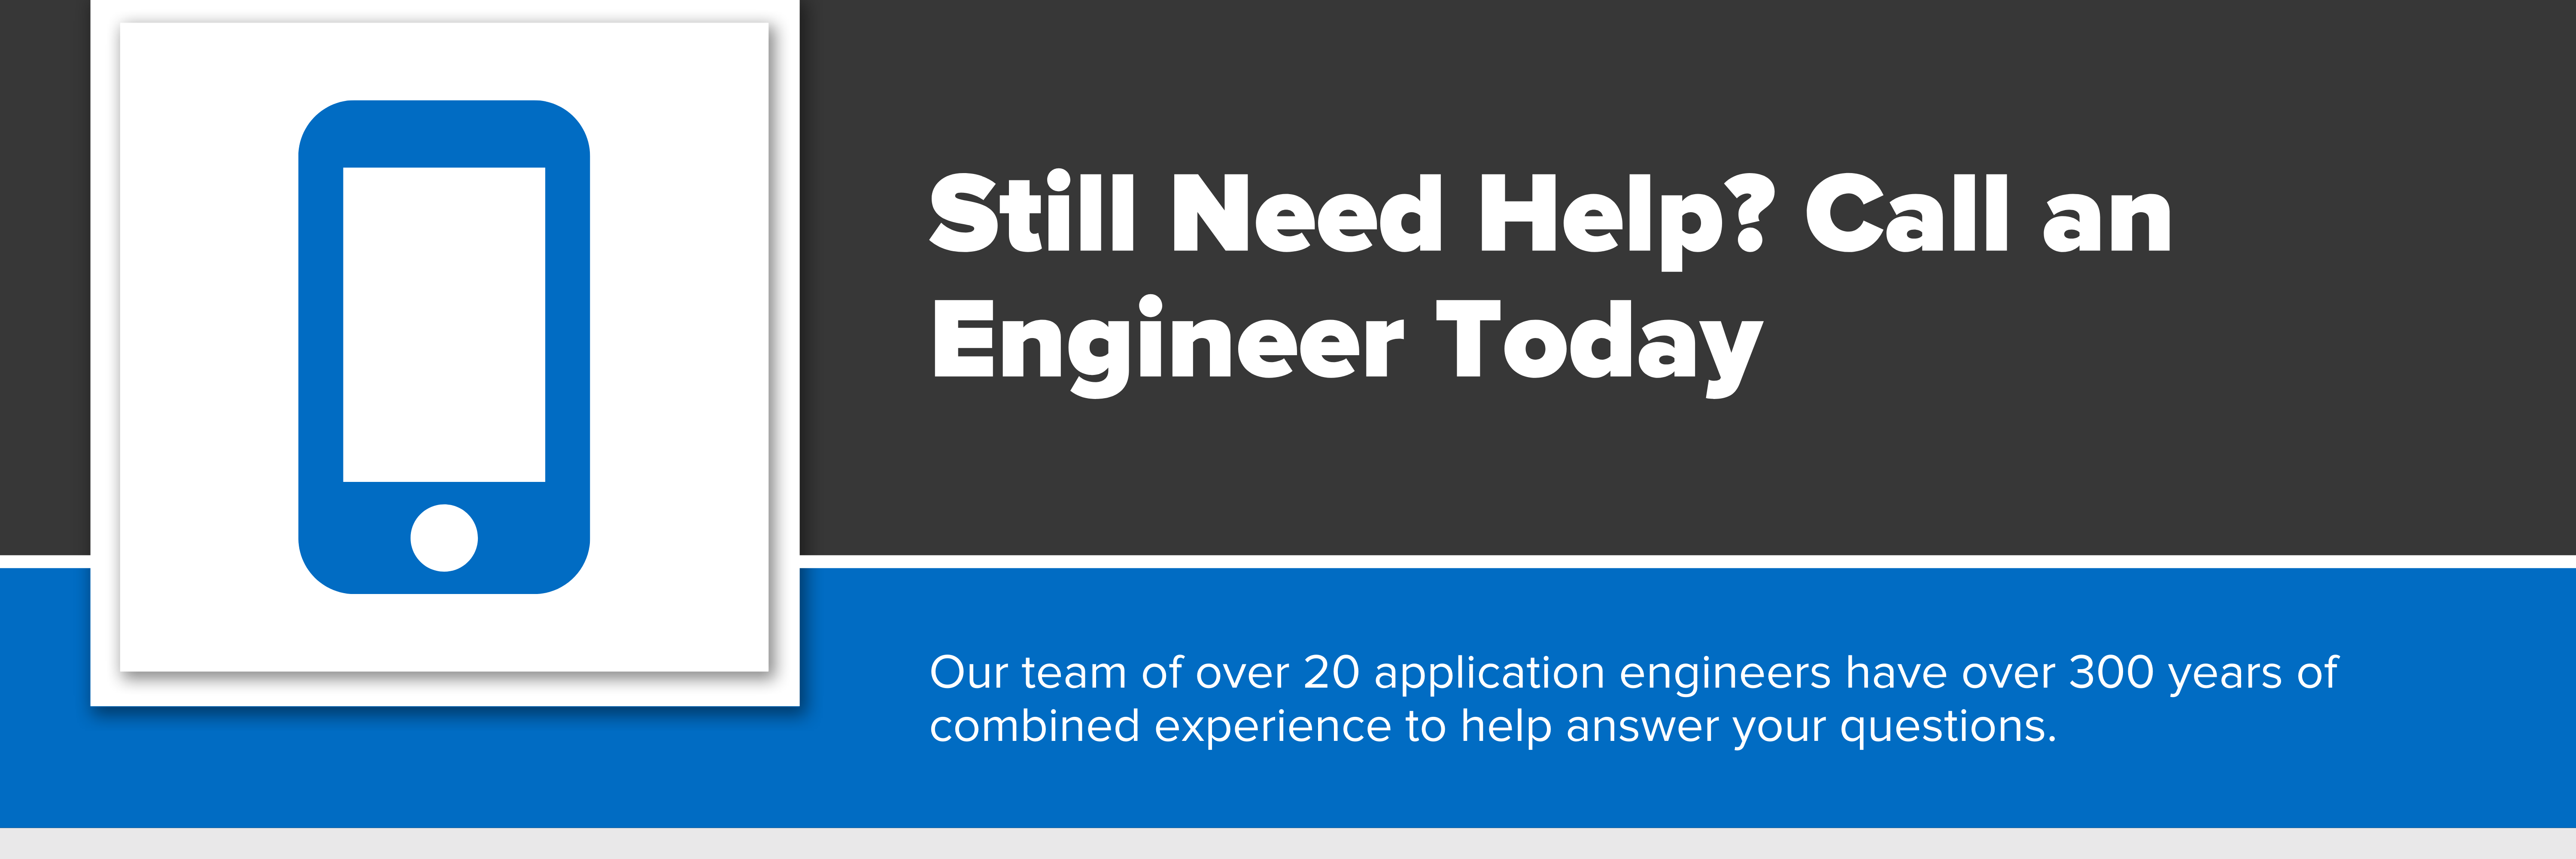 Header image with text "still need help? Call an engineer today."